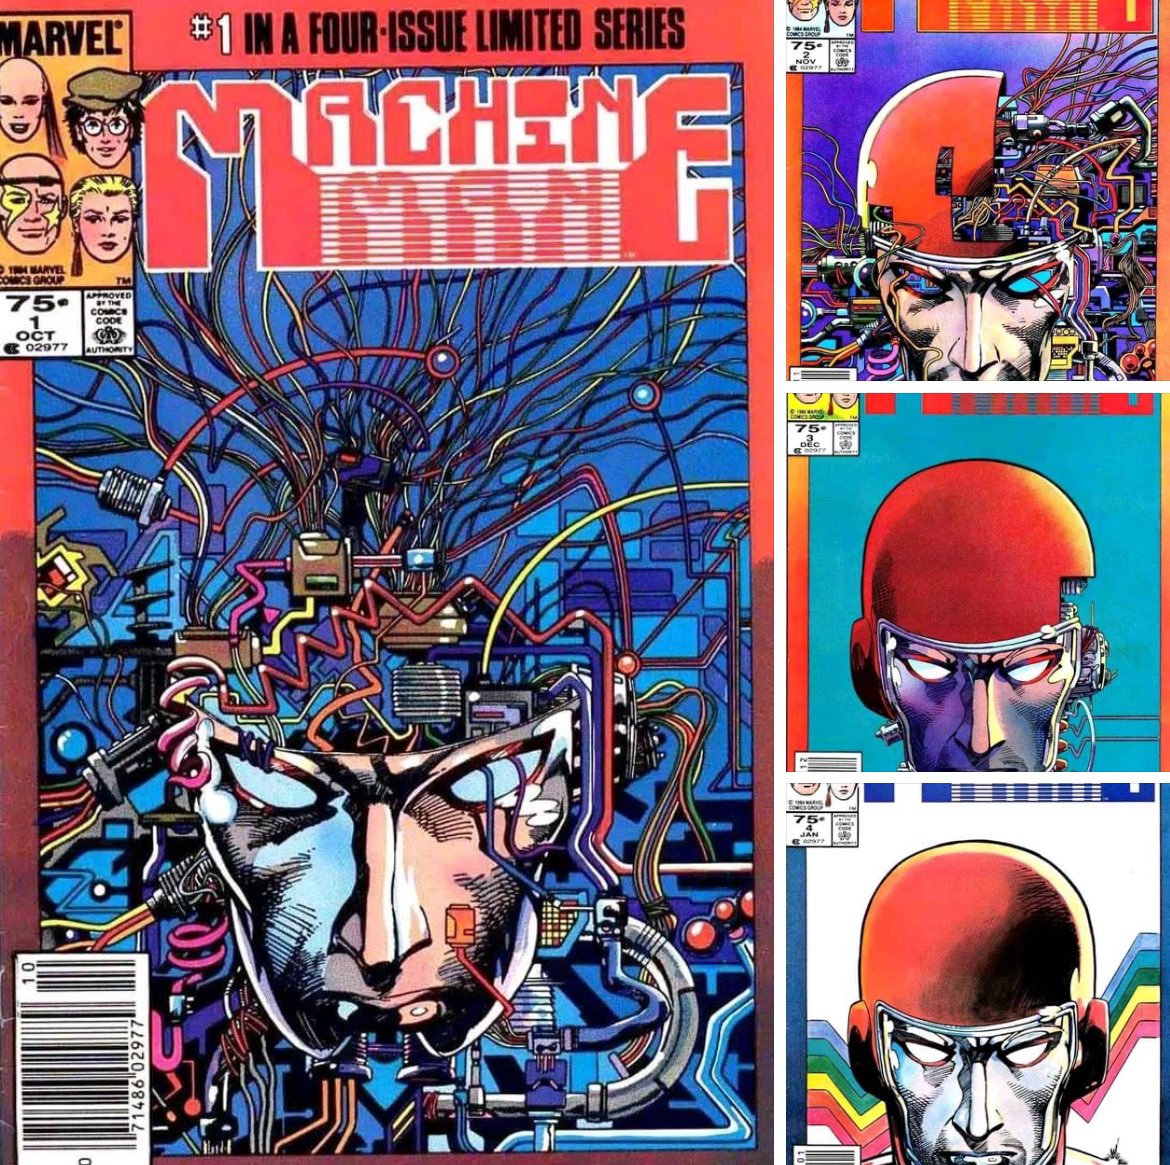 When it comes to character reboots very few talk about the 1984 #MachineMan Limited Series #1-4 with artwork by #BarryWindsorSmith. This series completely retooled the character from every aspect and stands as the characters finest moment IMO.